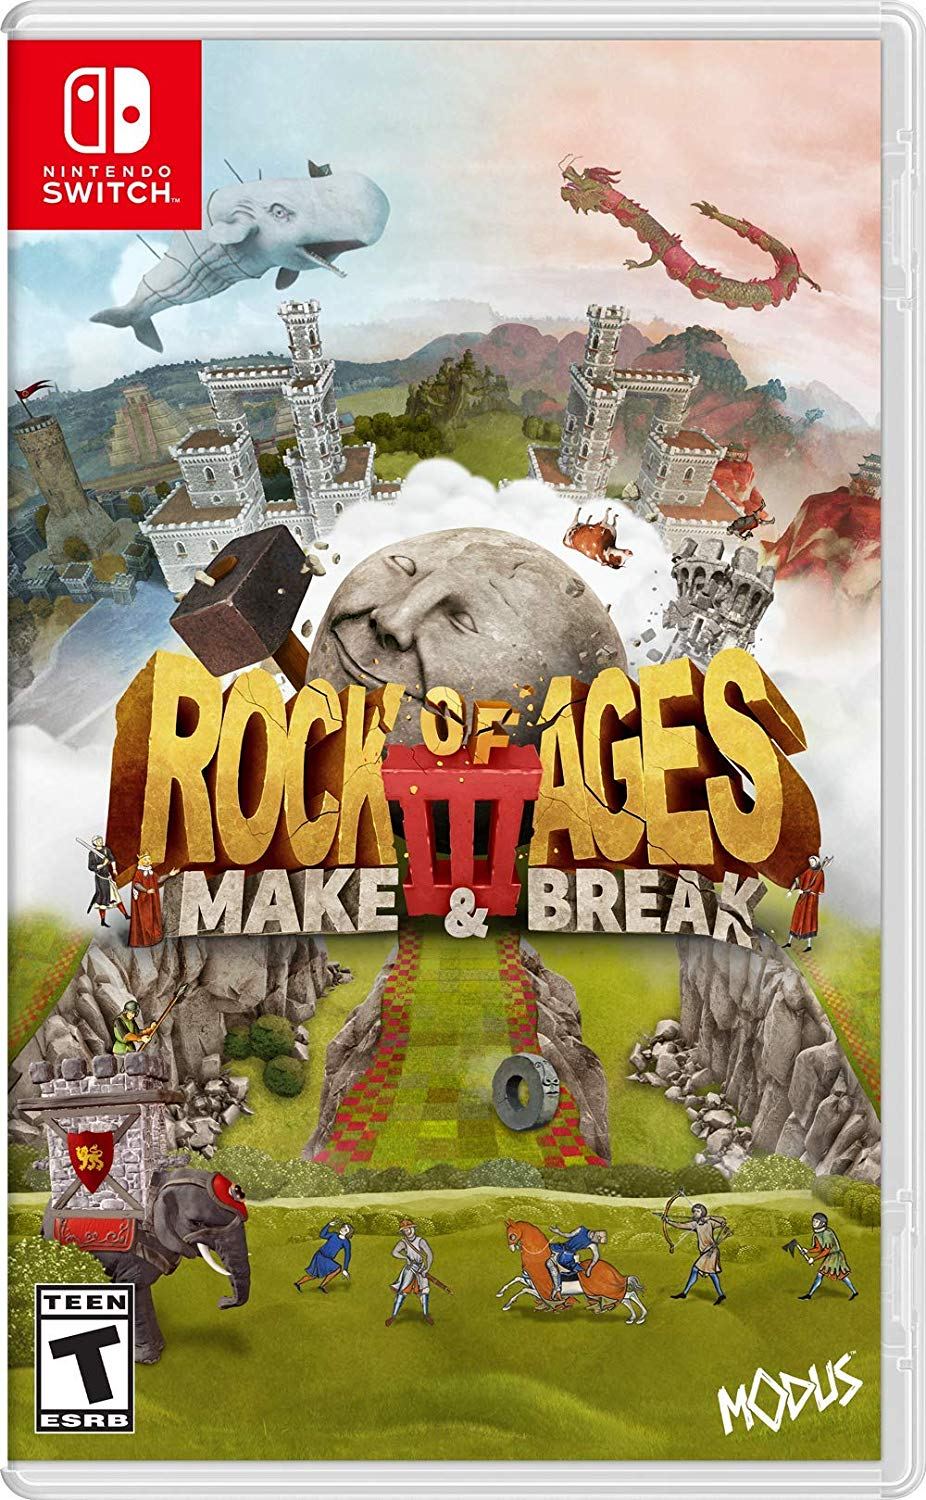 Rock of Ages 3: Make & Break for Nintendo Switch - Nintendo Official Site